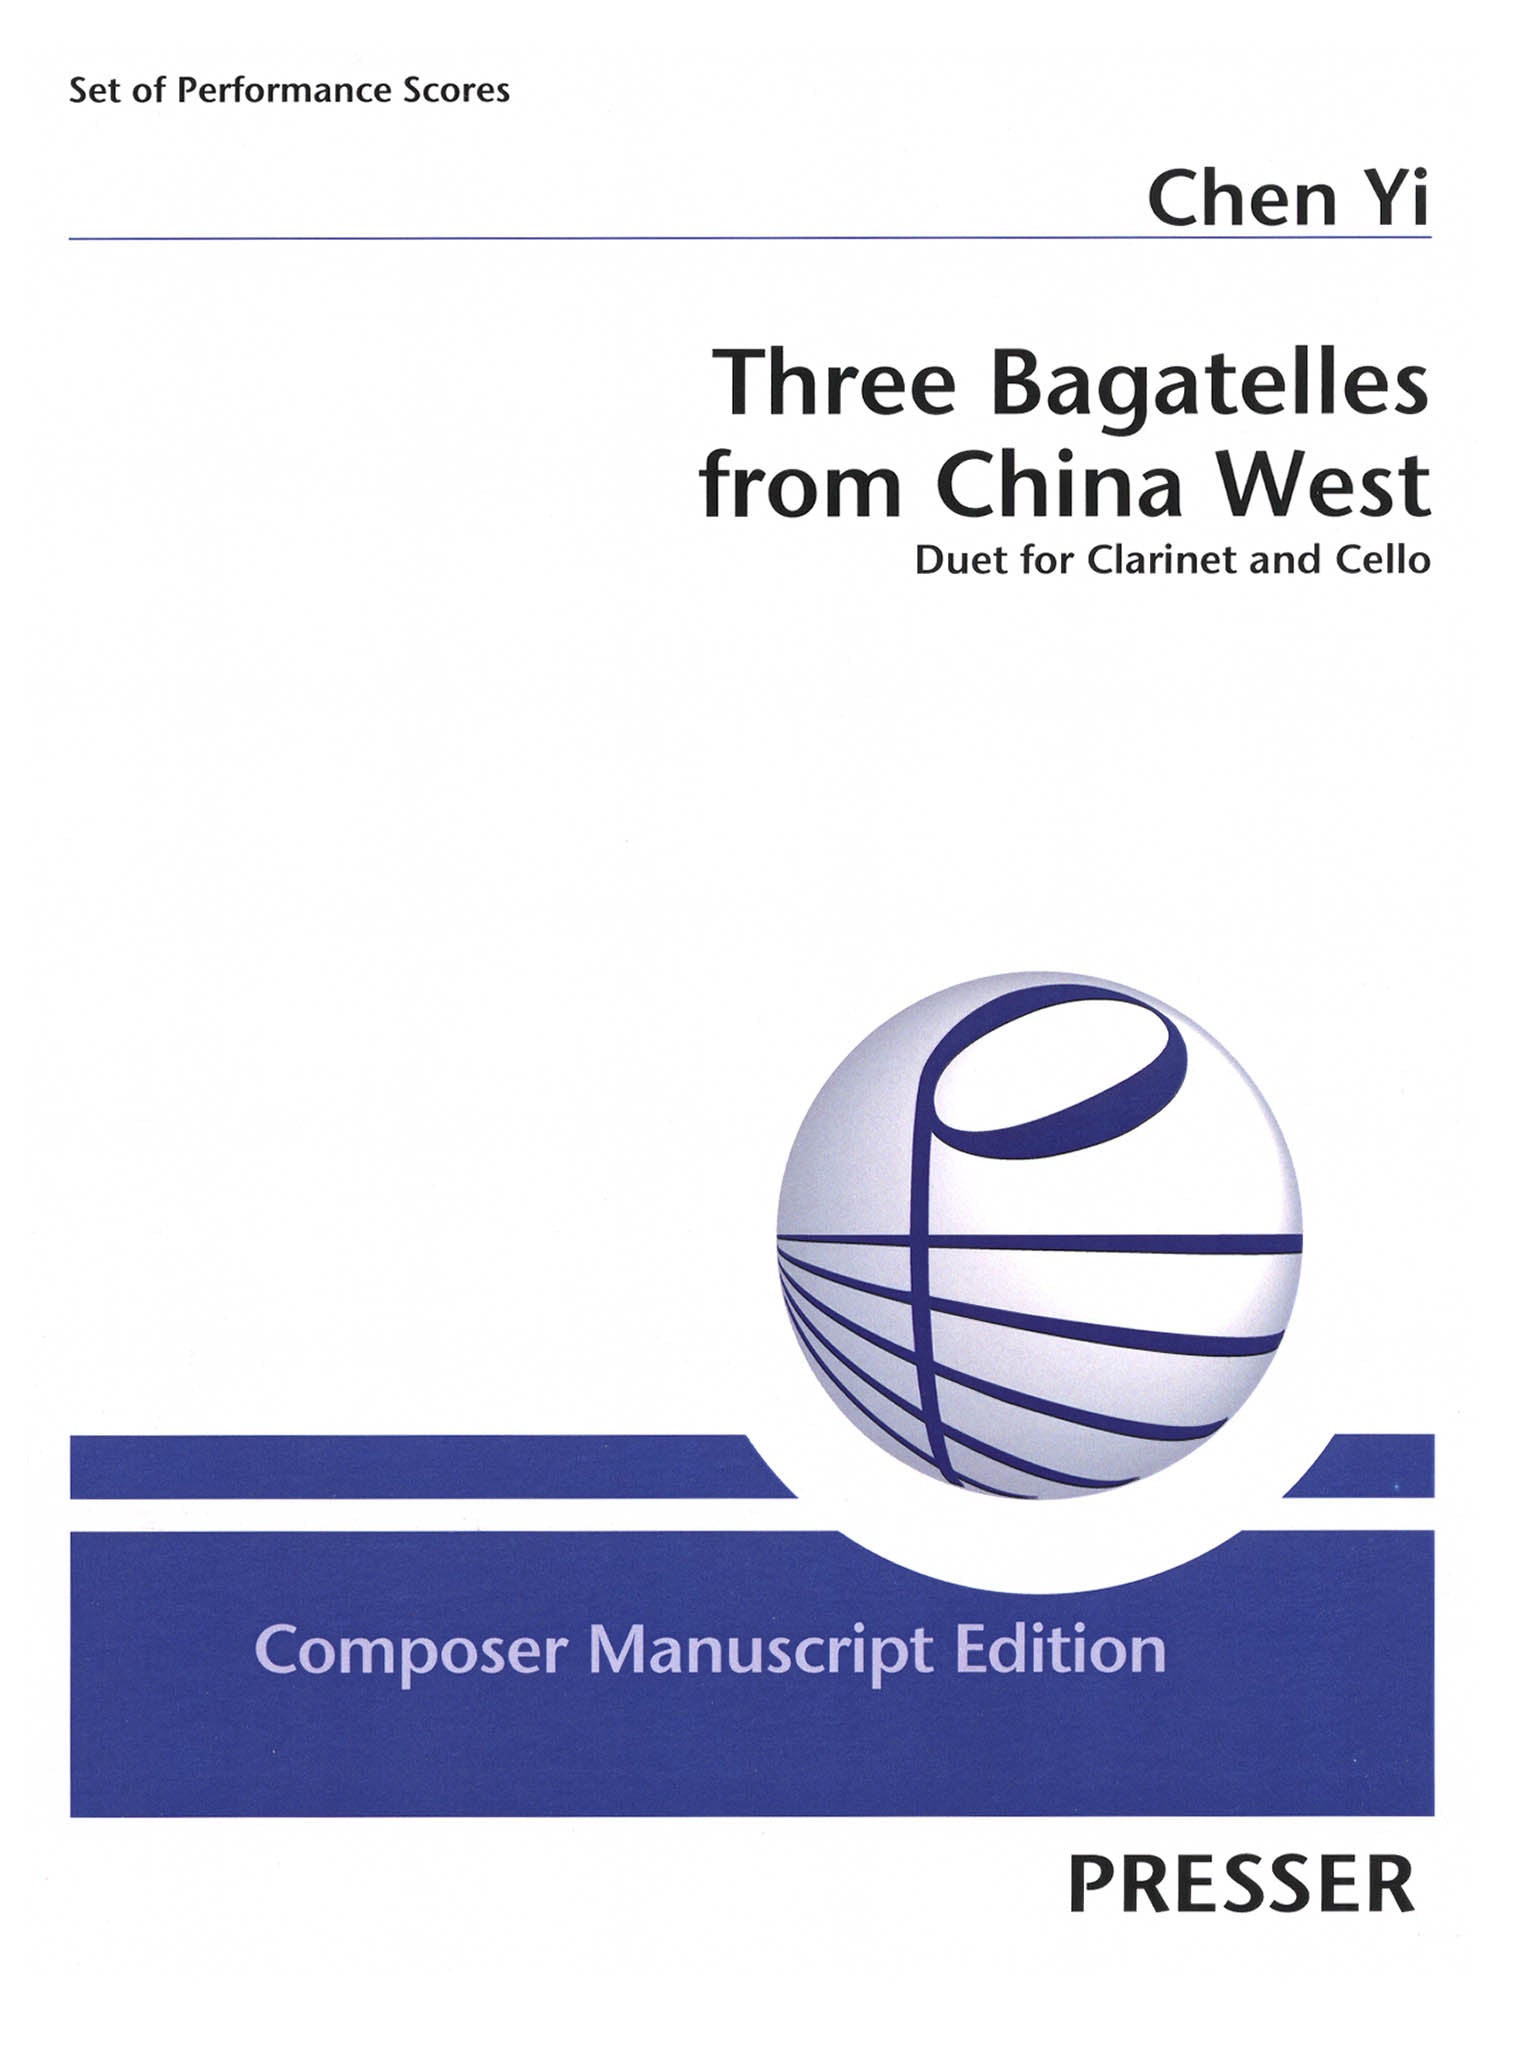 Chen Yi Three Bagatelles from China West clarinet and cello duet cover